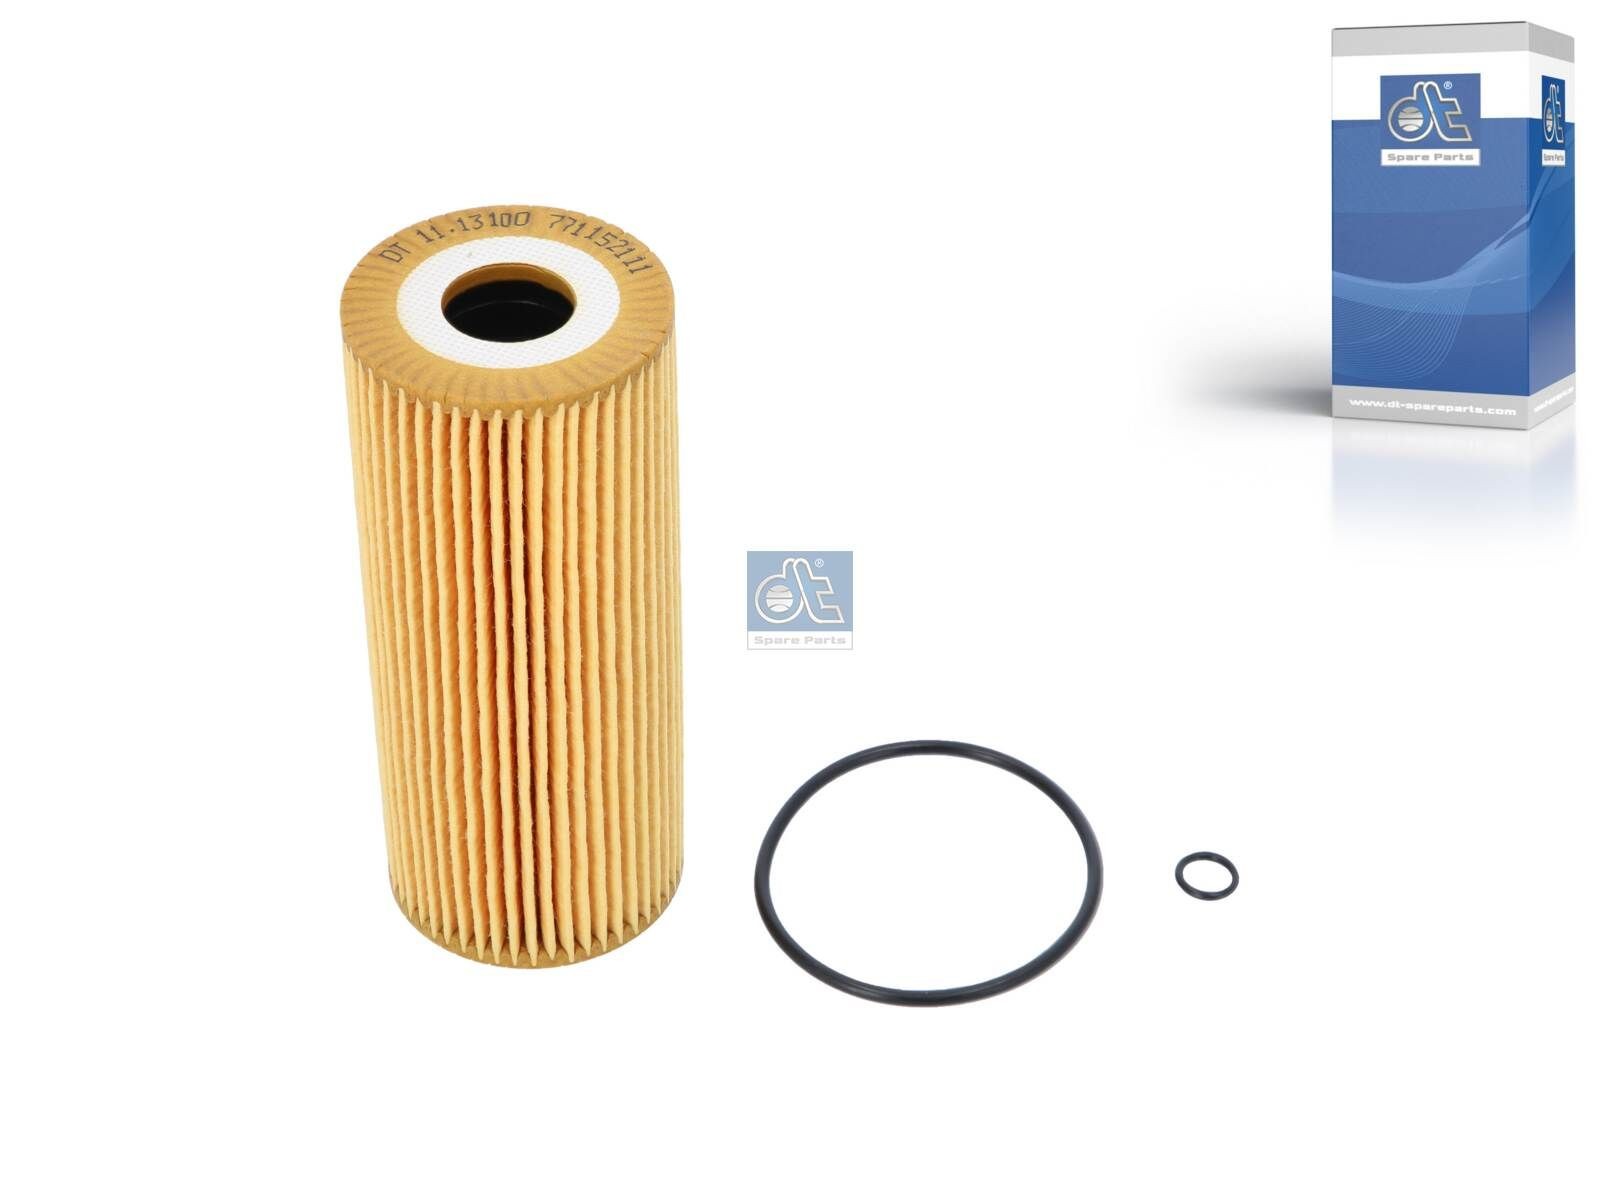 11.13100 DT Spare Parts Oil filters MINI Filter Insert